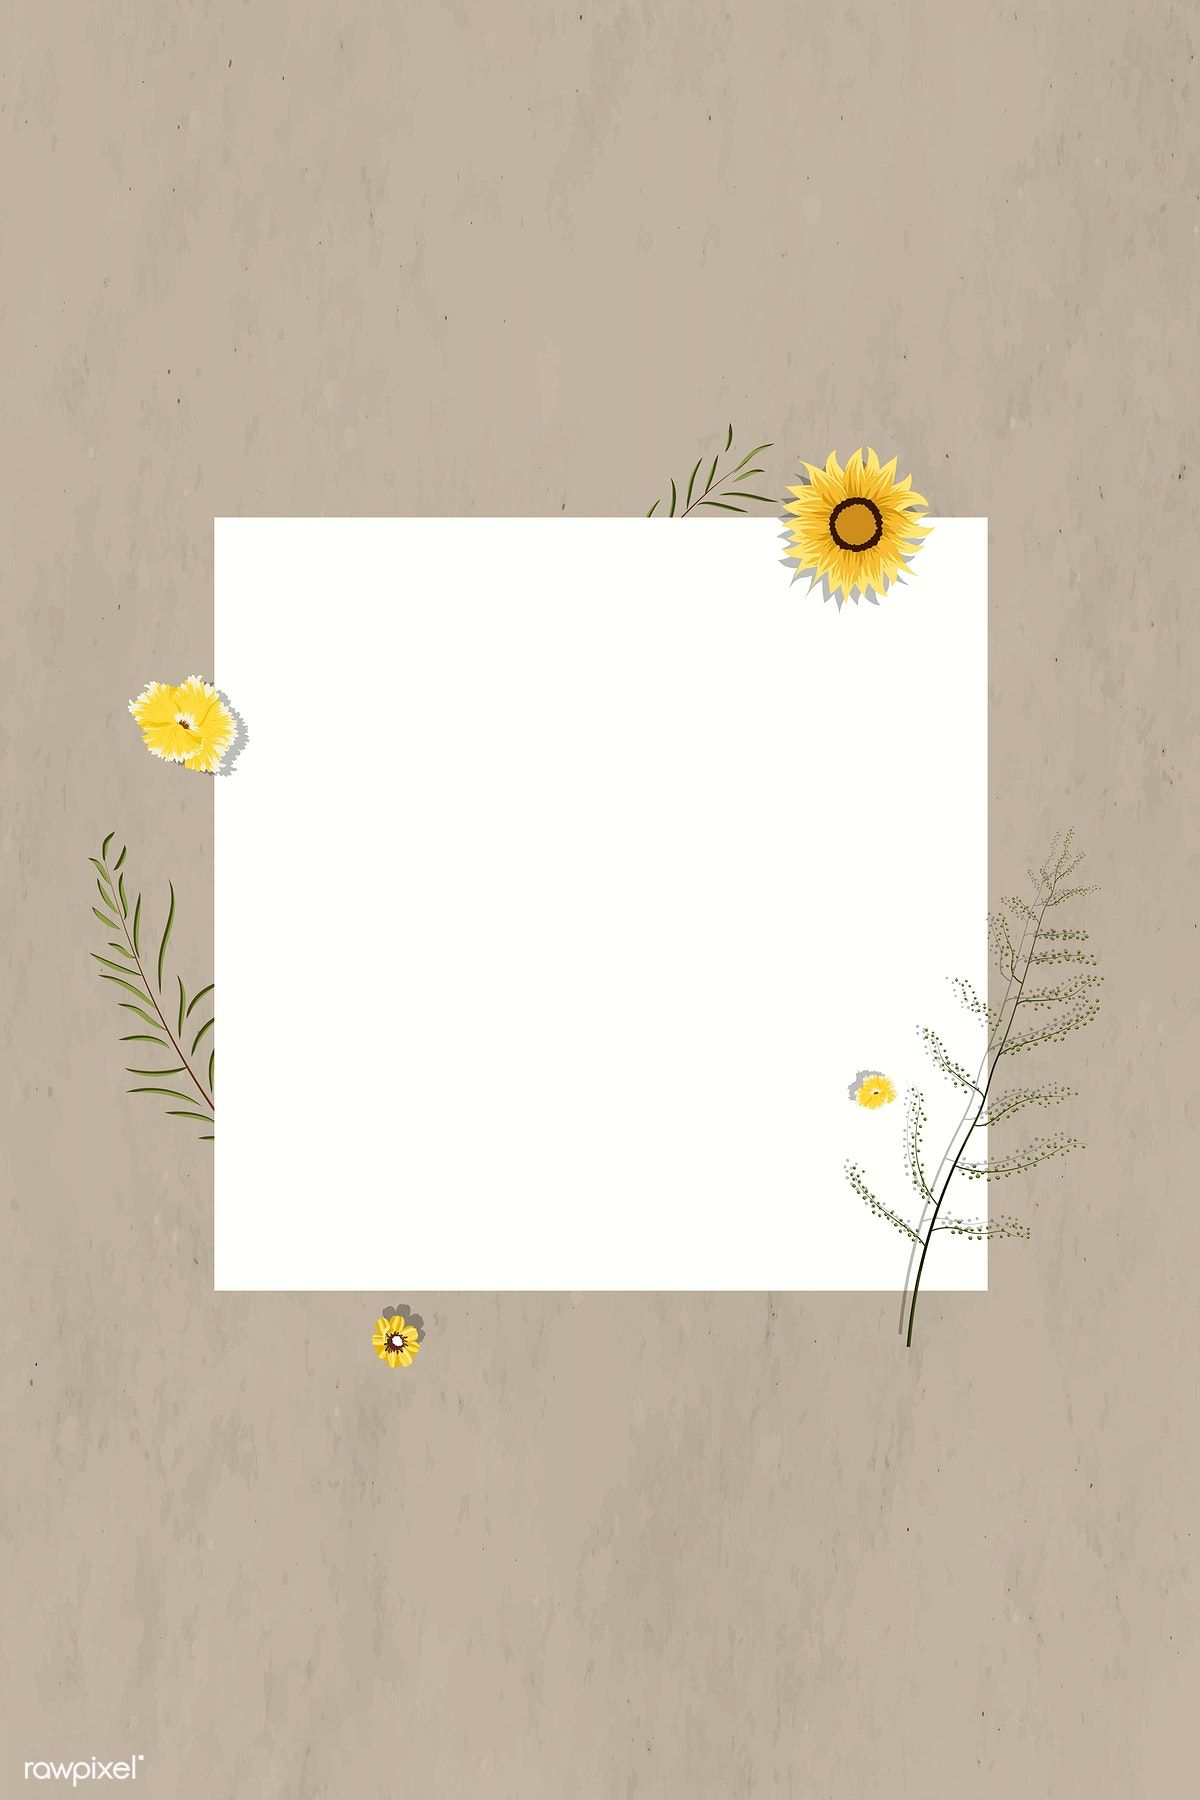 Download premium vector of Blank square sunflower frame vector by Aew about autumn, sunflower,. Photo collage , Instagram frame , Instagram frame